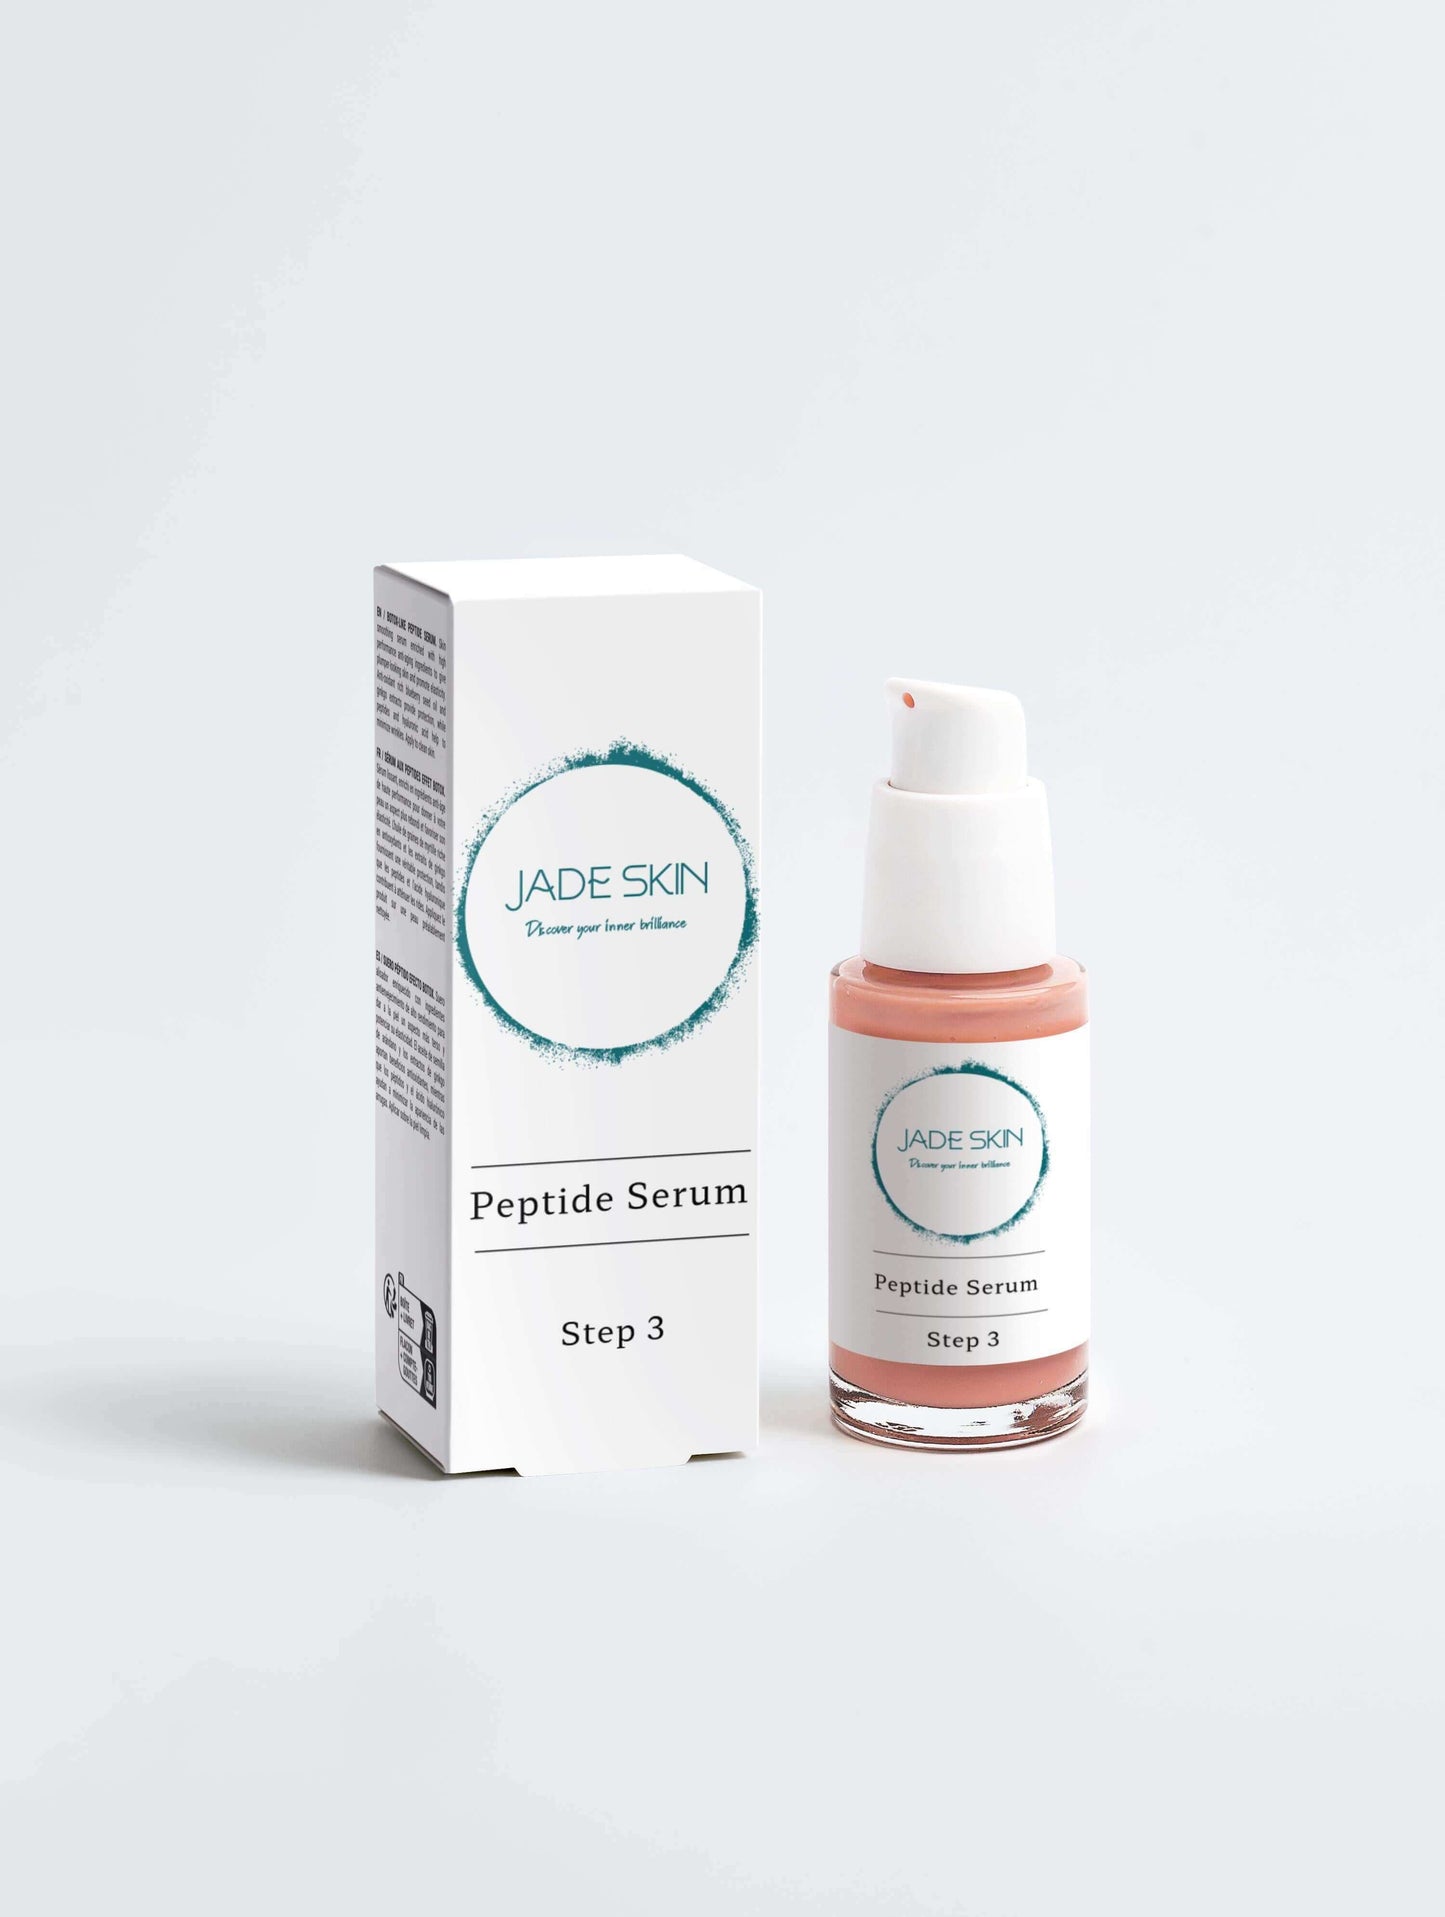 Peptide Serum to be used as Step 3 of you skin care routine